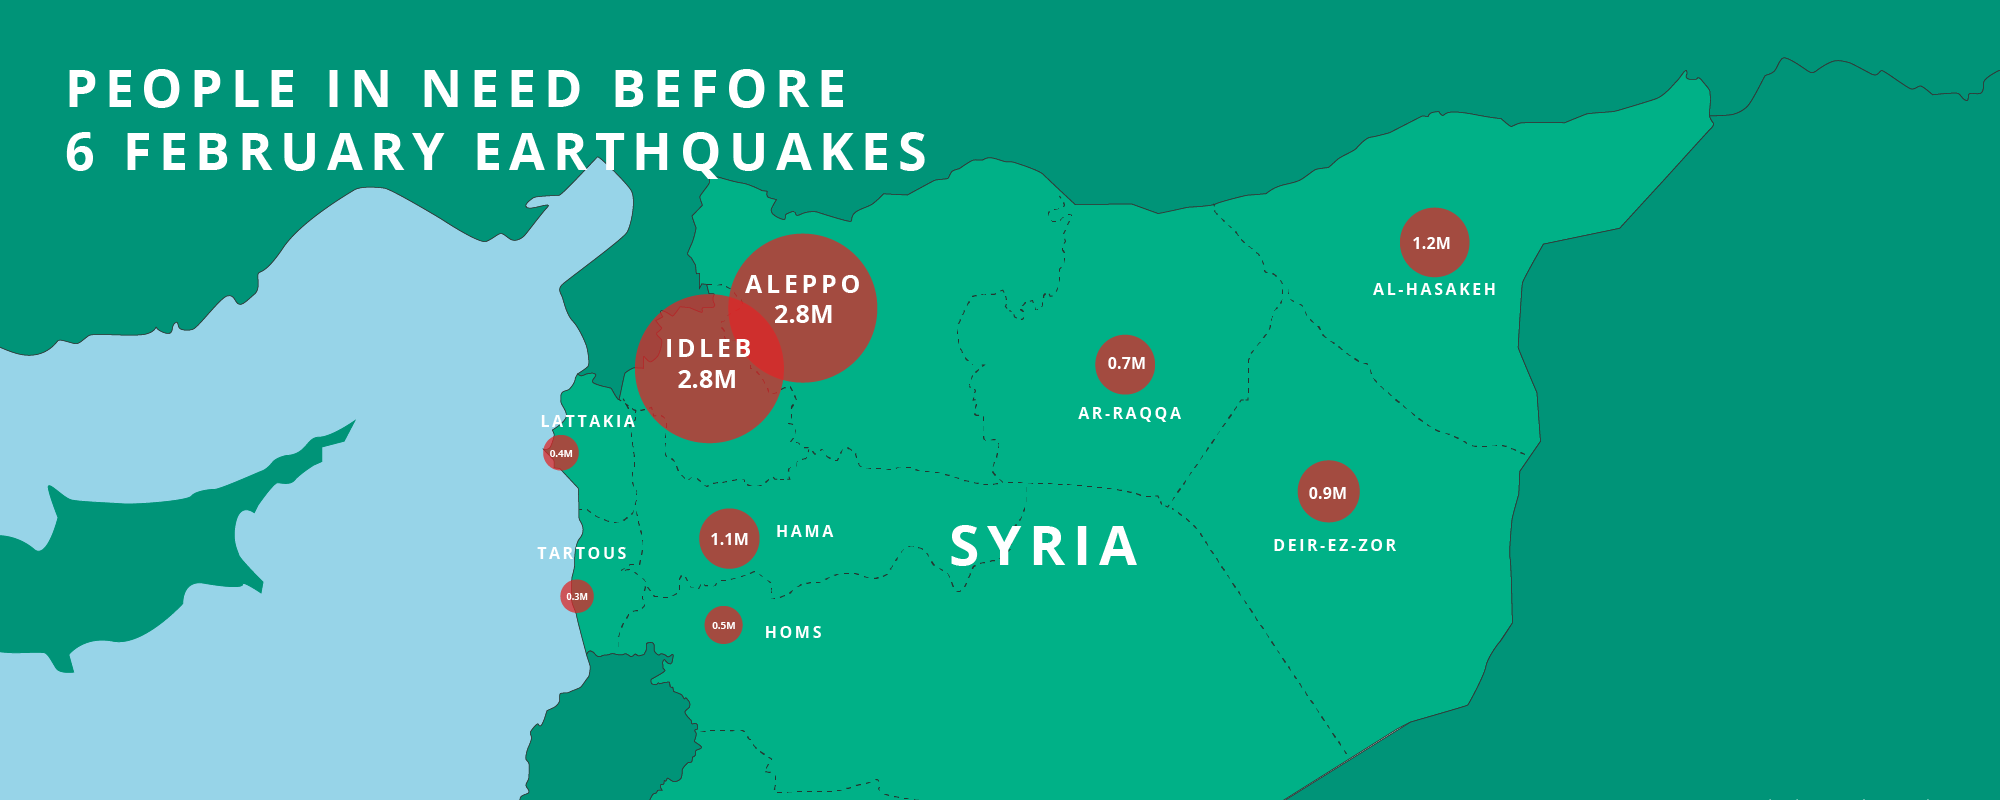 Map of Syria showing locations and numbers of people in need in different areas of the country before the February 2023 earthquakes.